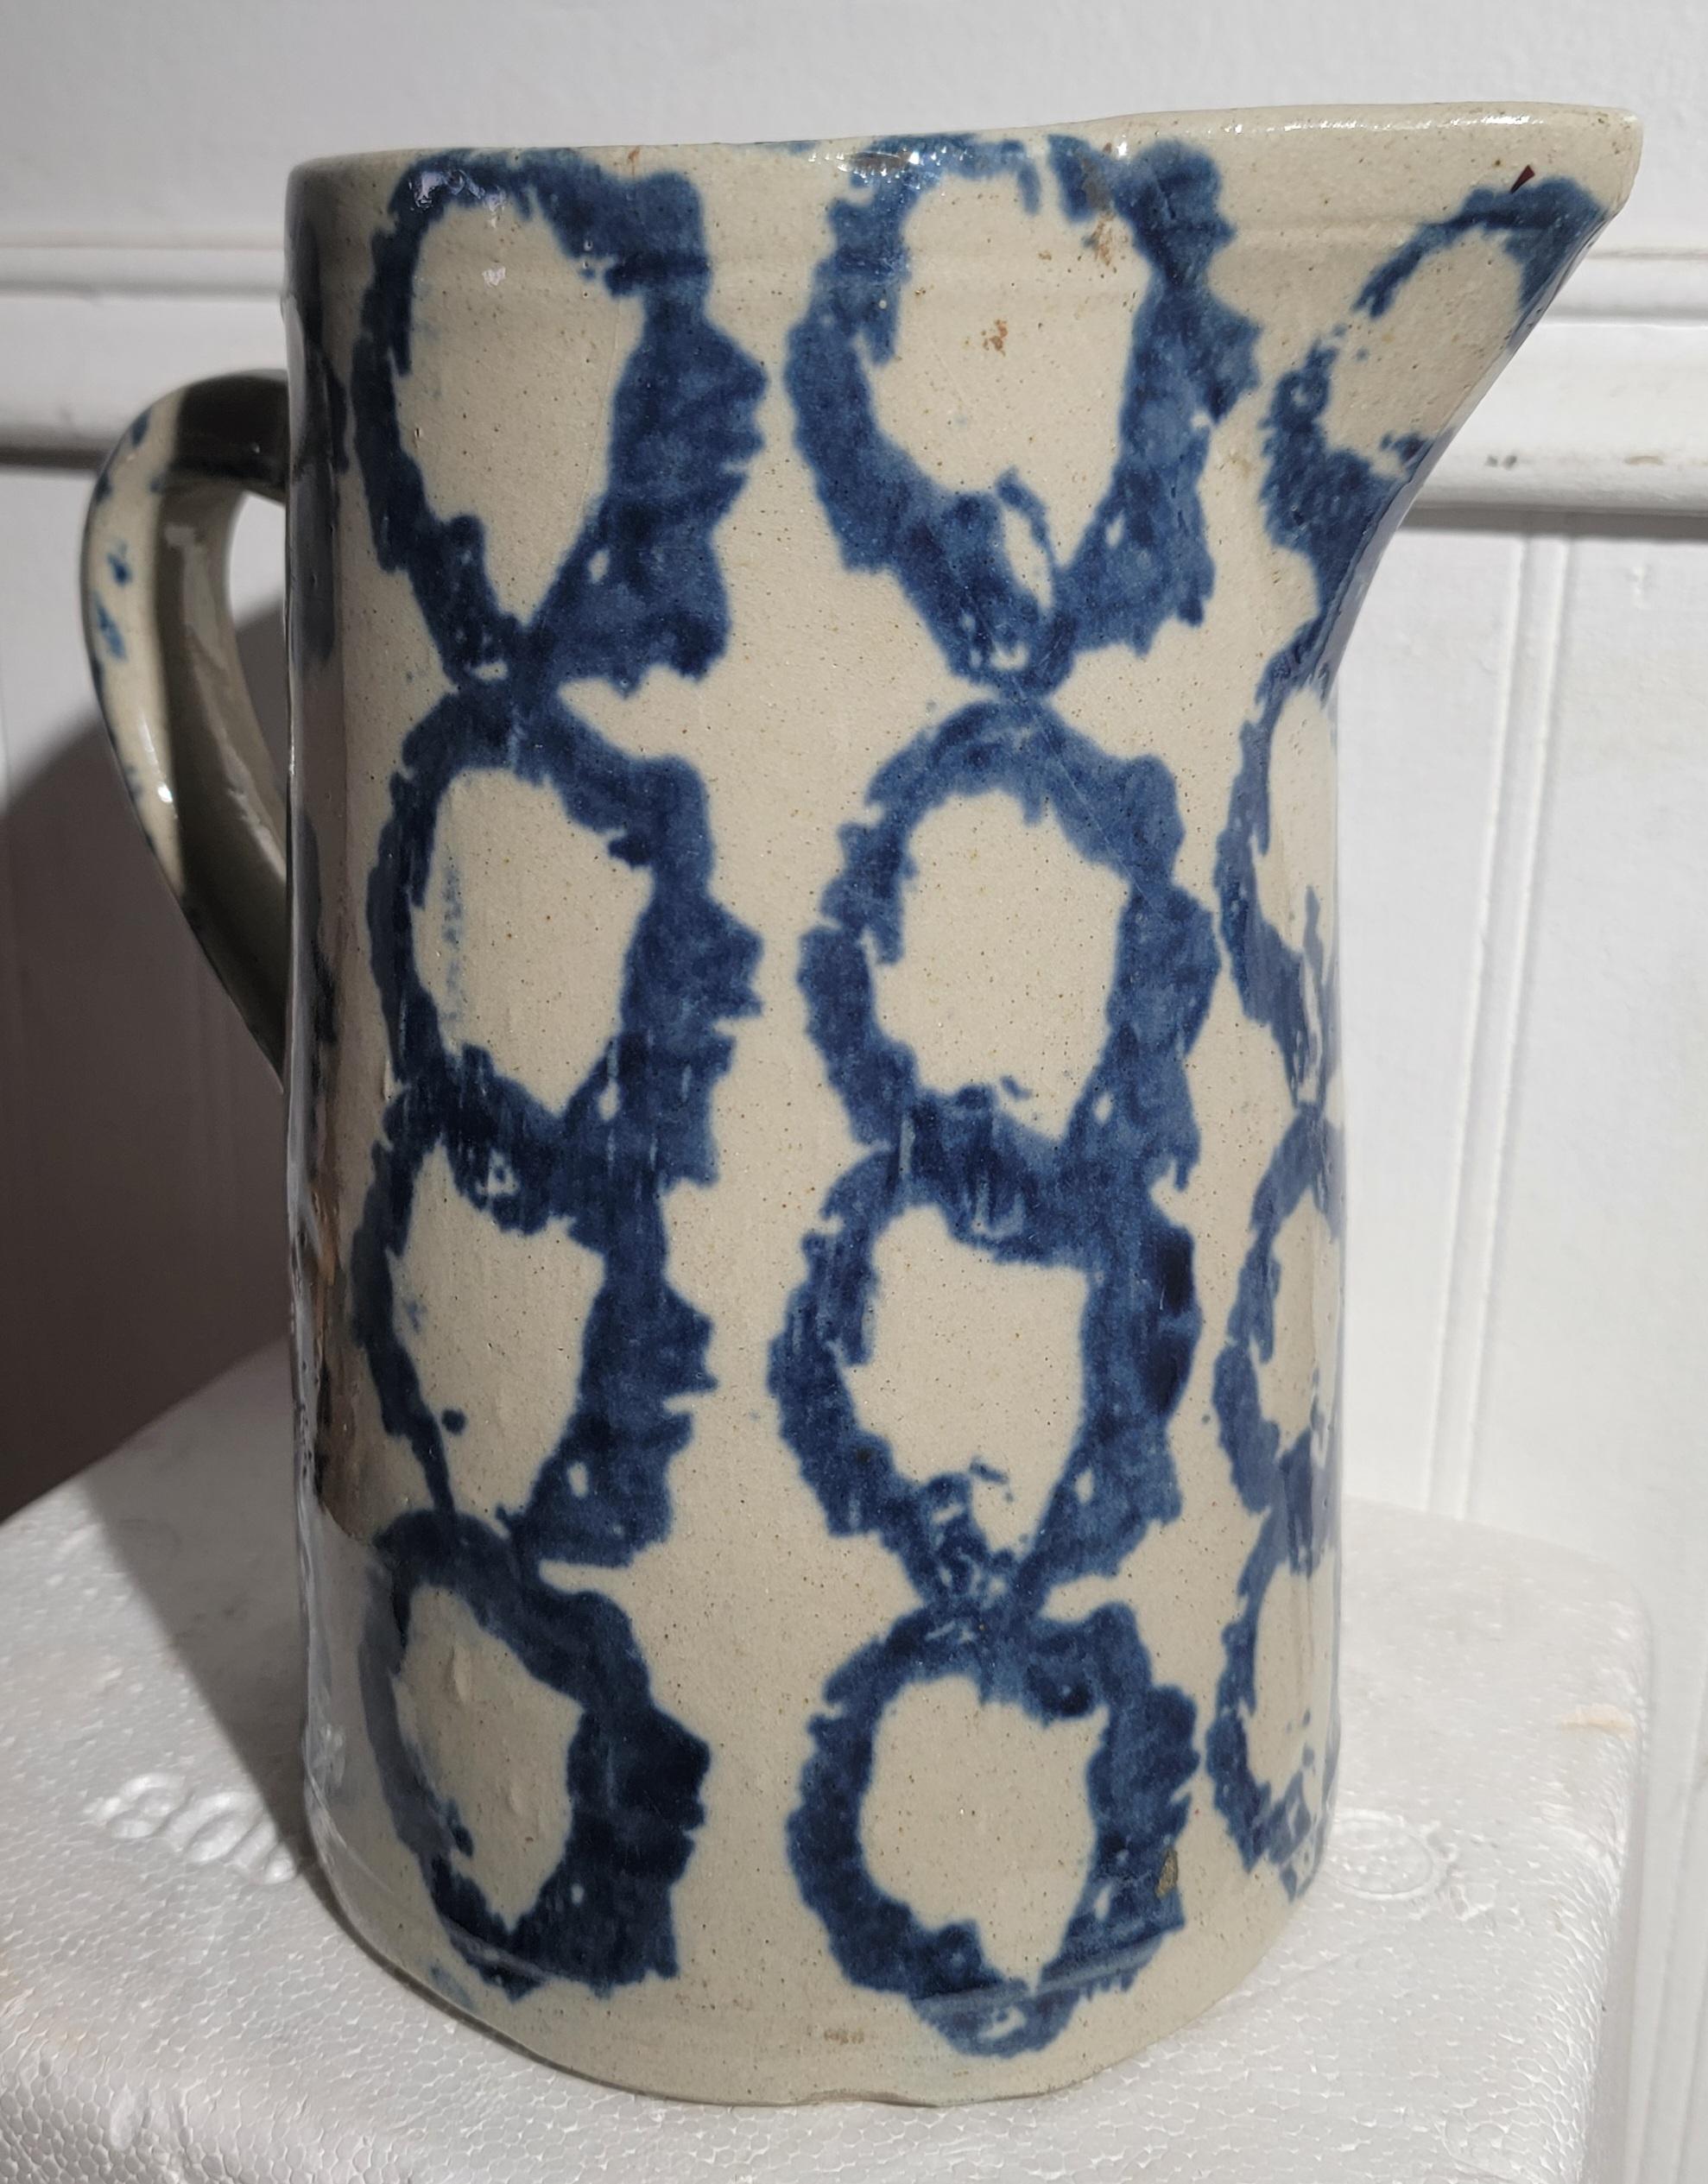 19thc Sponge ware with smoke ring pattern in blue and white. When Smoke Ring Patters are spoken of this is the typical design a thick blue smoke ring with a beautiful white background. This is the most sought after design of all the smoke ring